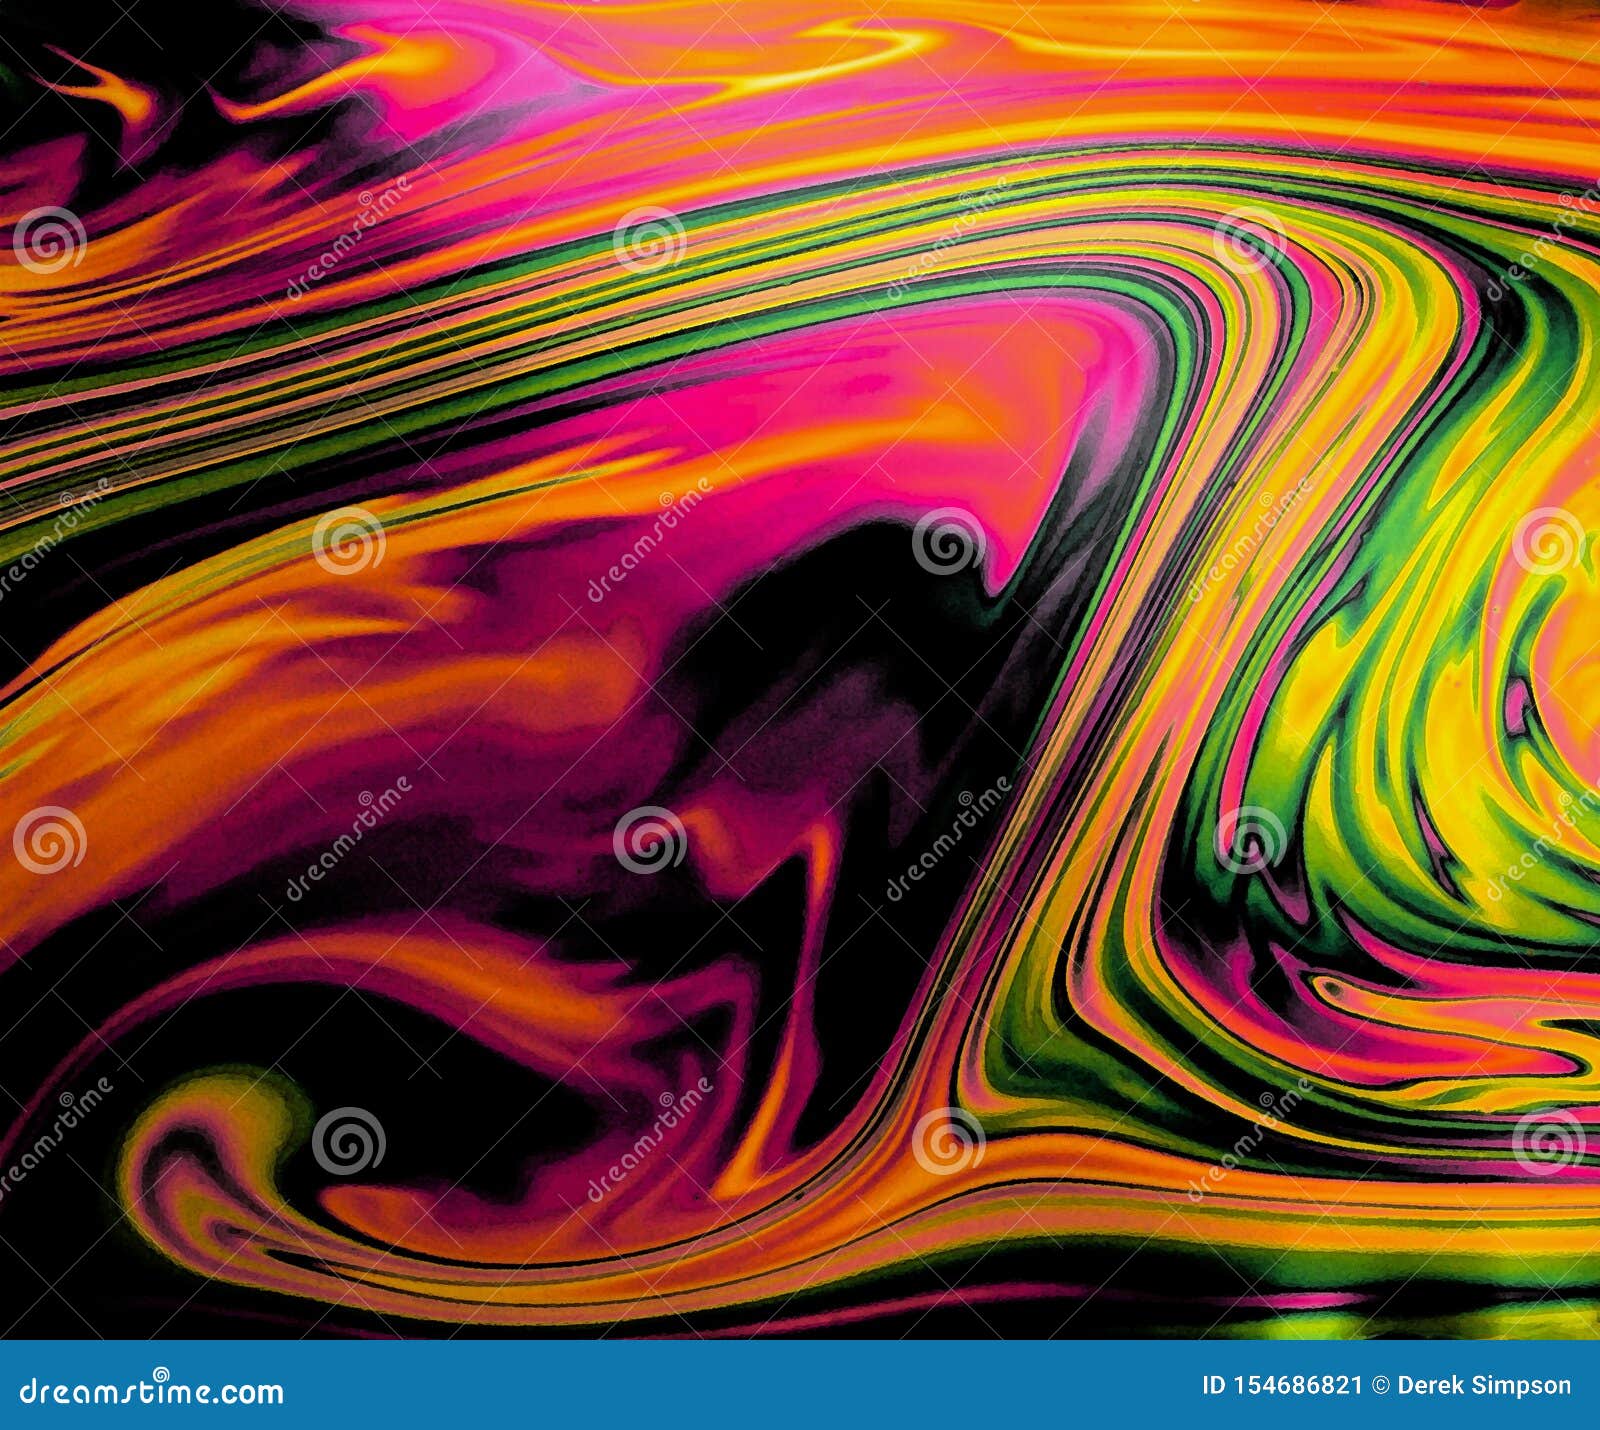 colorful, trippy psychedelic background giving the appearance of motion